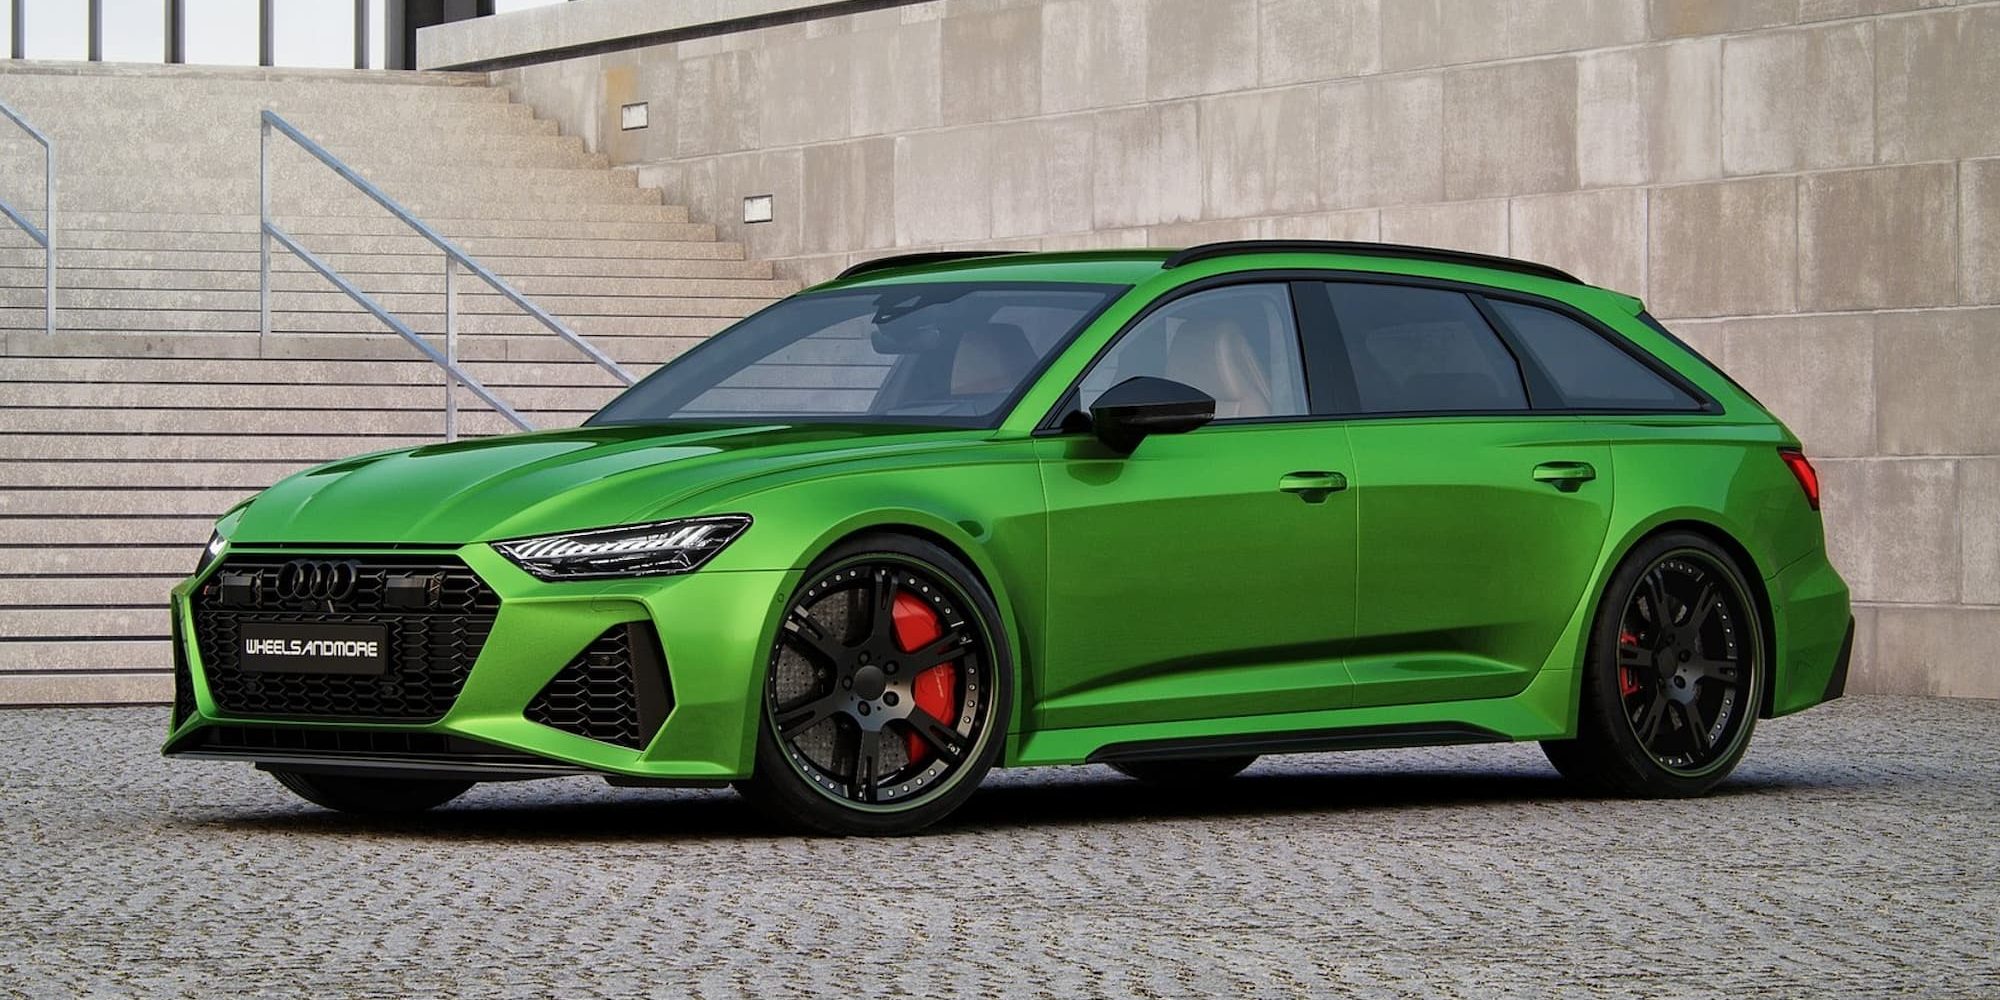 To Audi RS 6